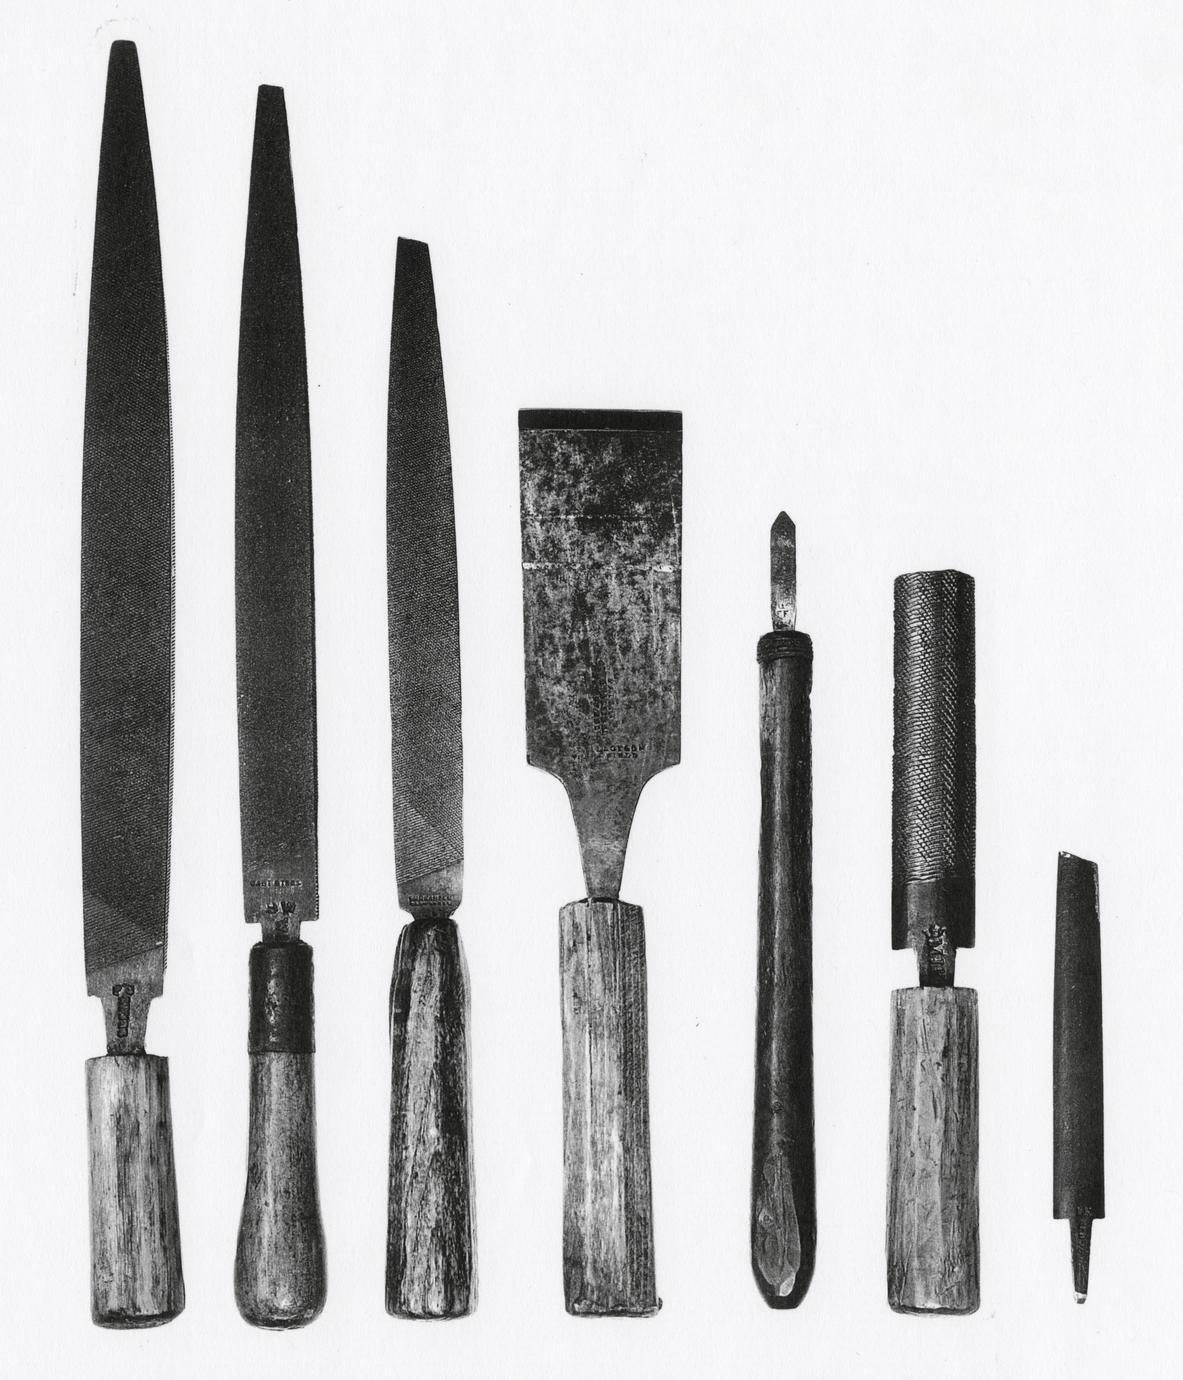 Six examples of files, woodworking and metalworking tools.